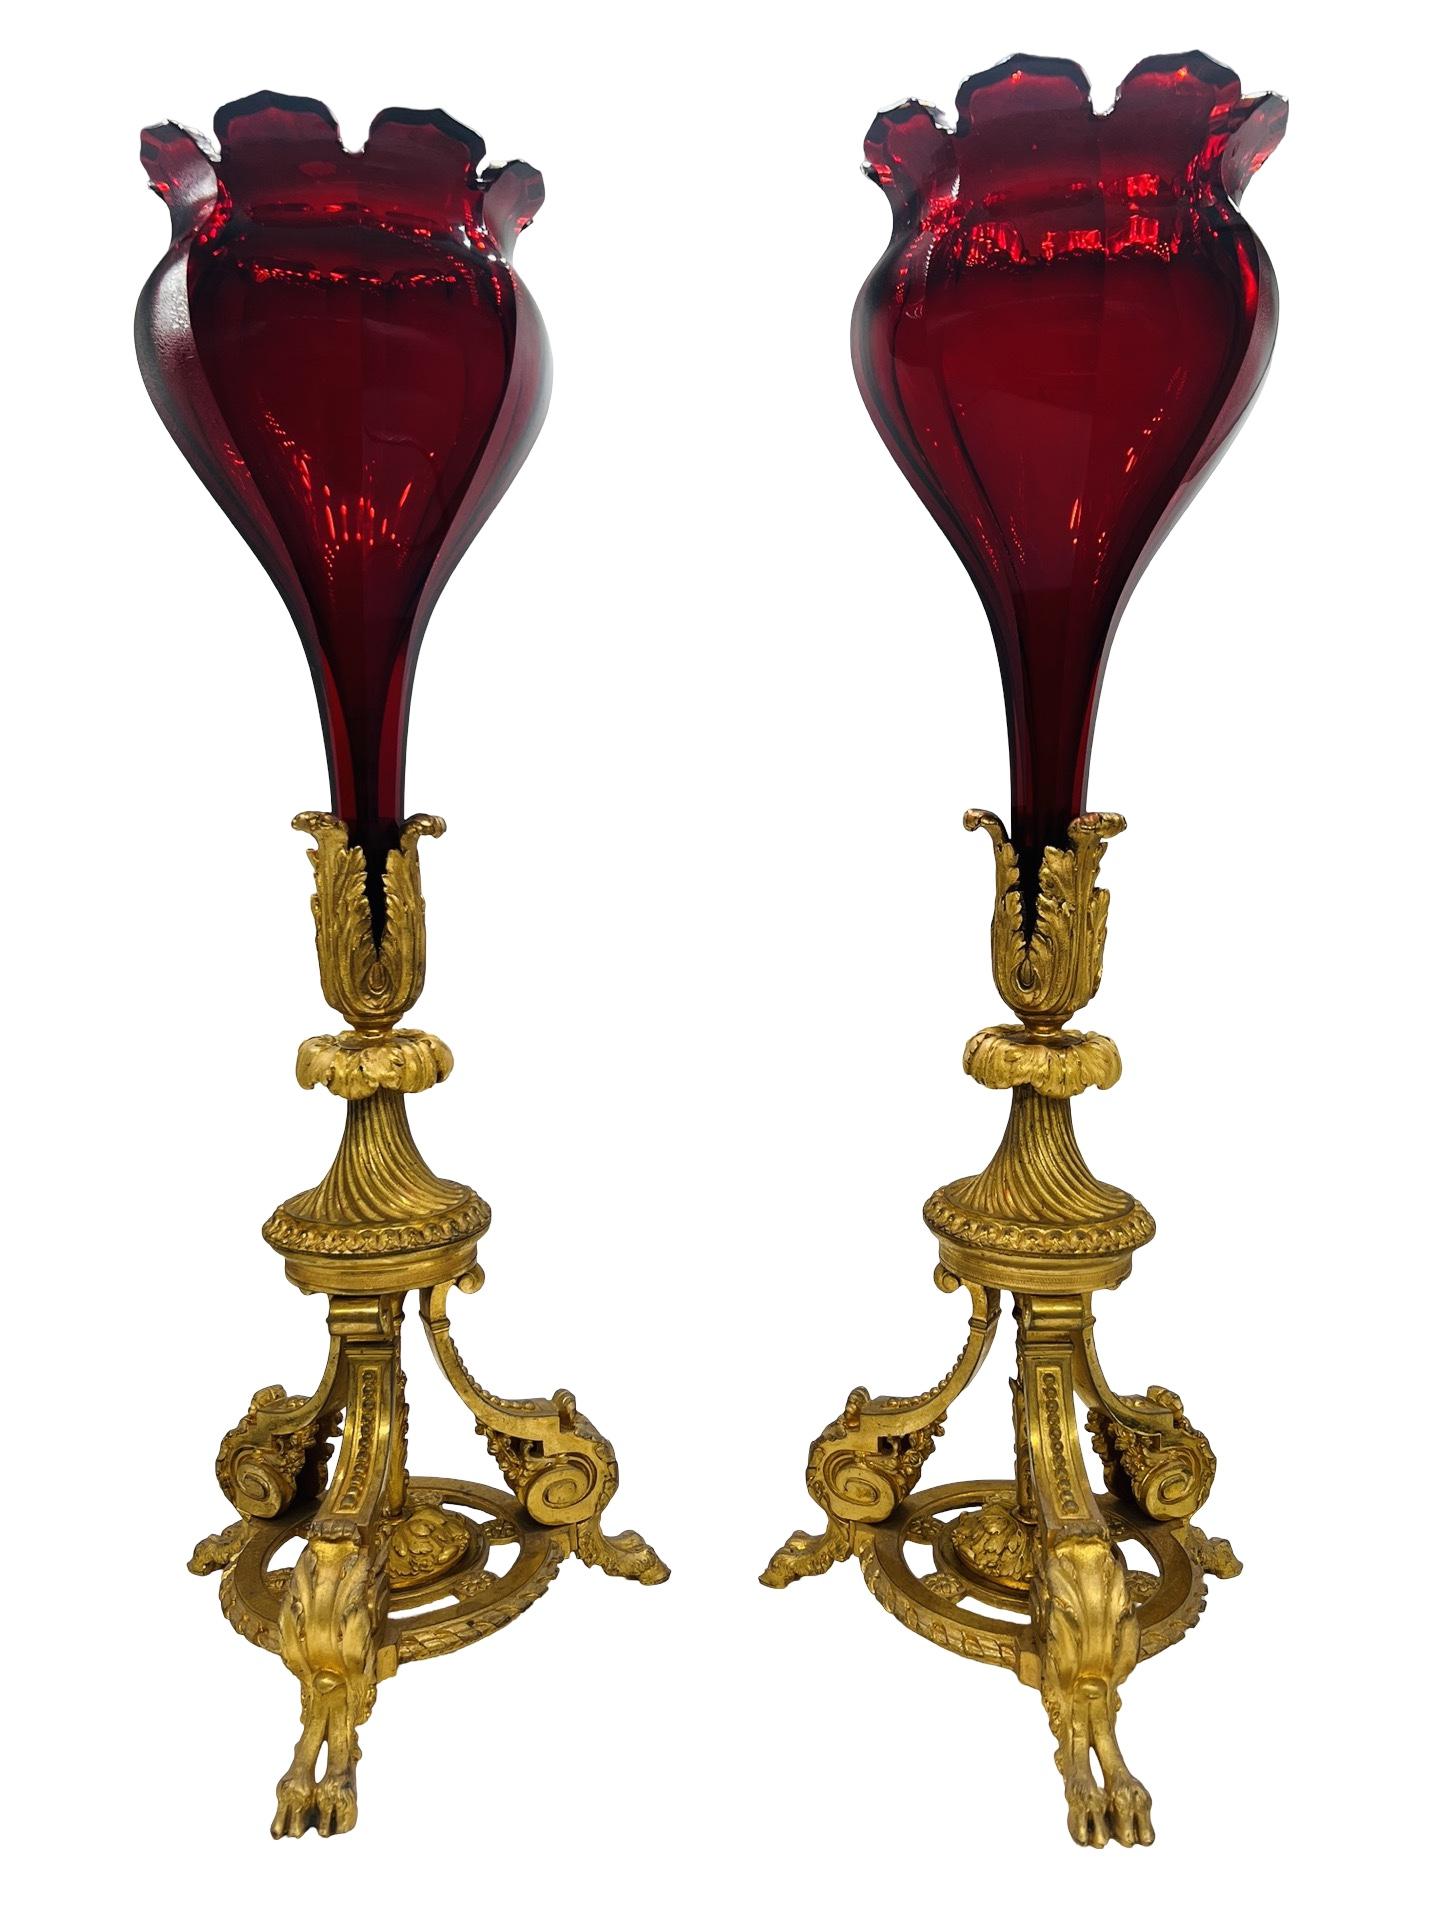 Baccarat (French, founded 1764), circa mid to late 19th century.

This pair of magnificent and highly unusual glass and bronze ormolu trumpet vases are almost certainly created by the renowned French firm Baccarat. Baccarat’s history goes back to